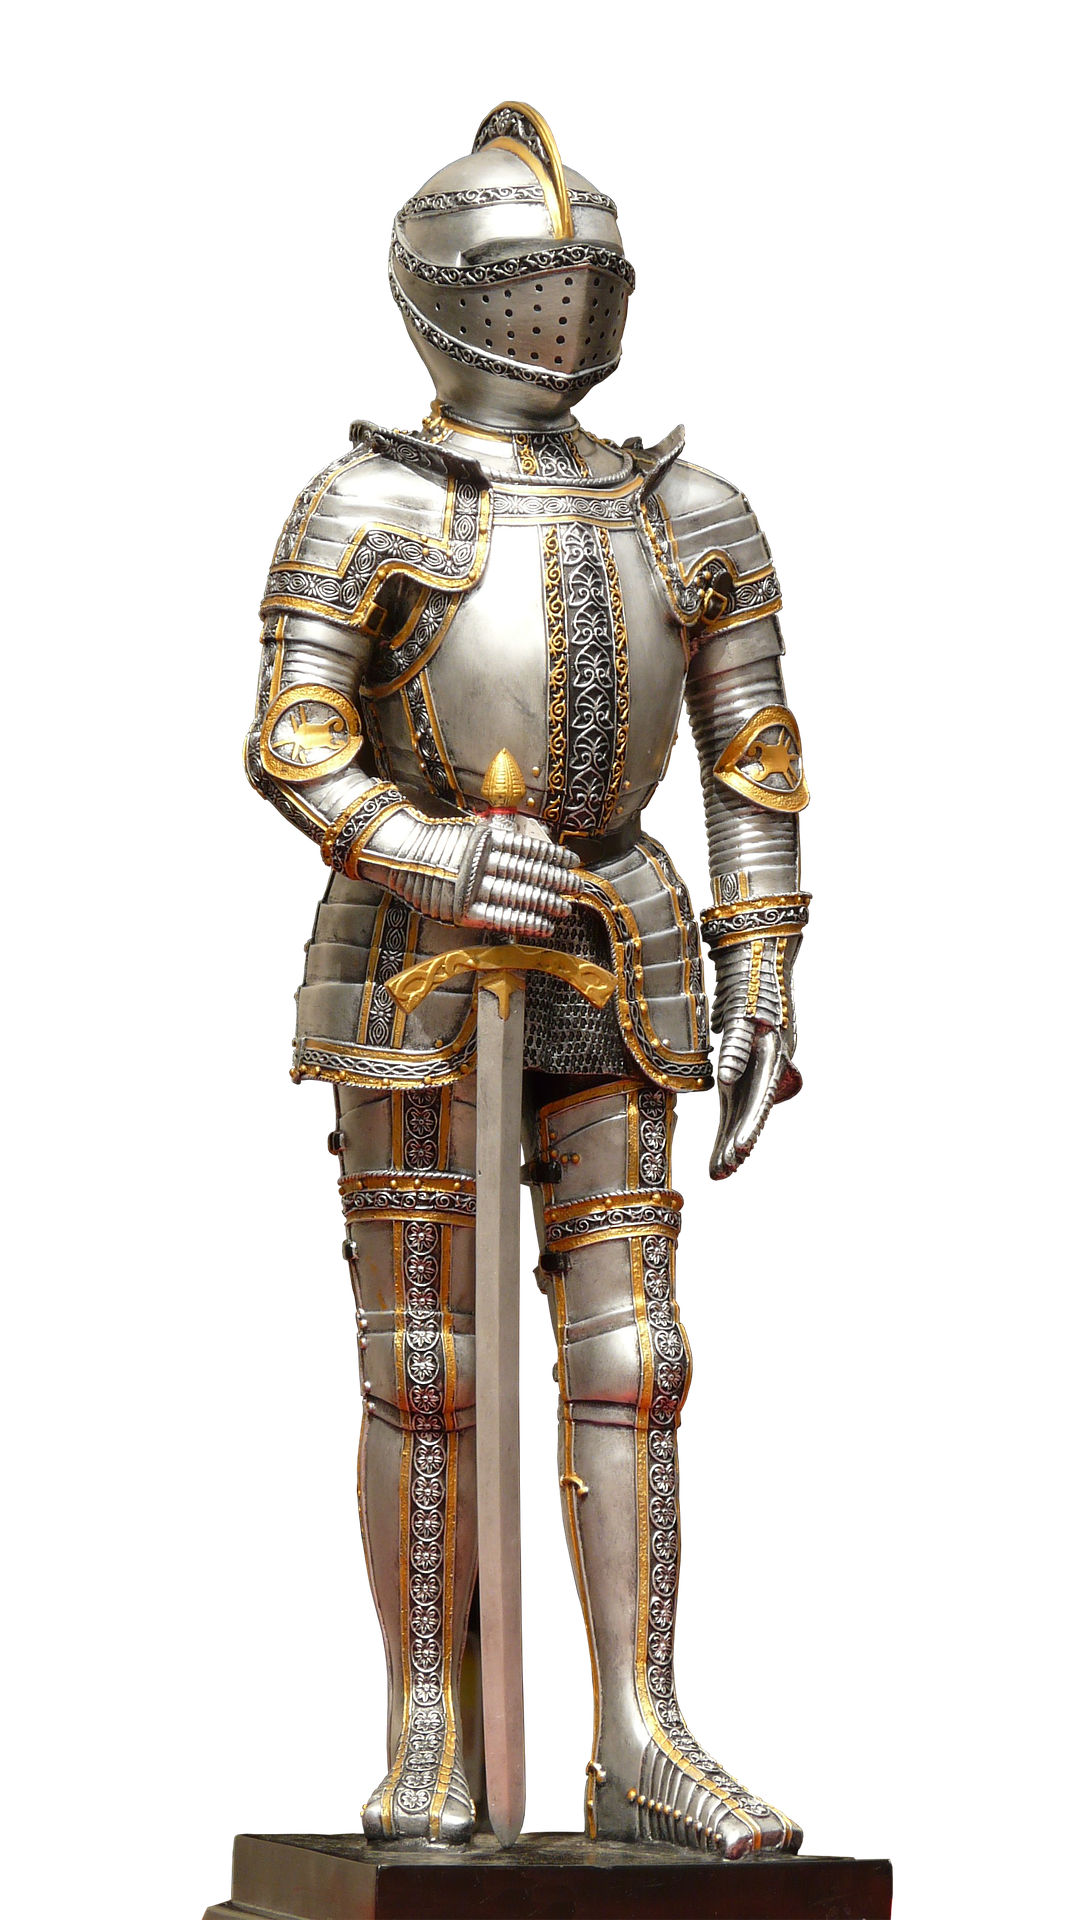 A Statue Of A Knight In Armor